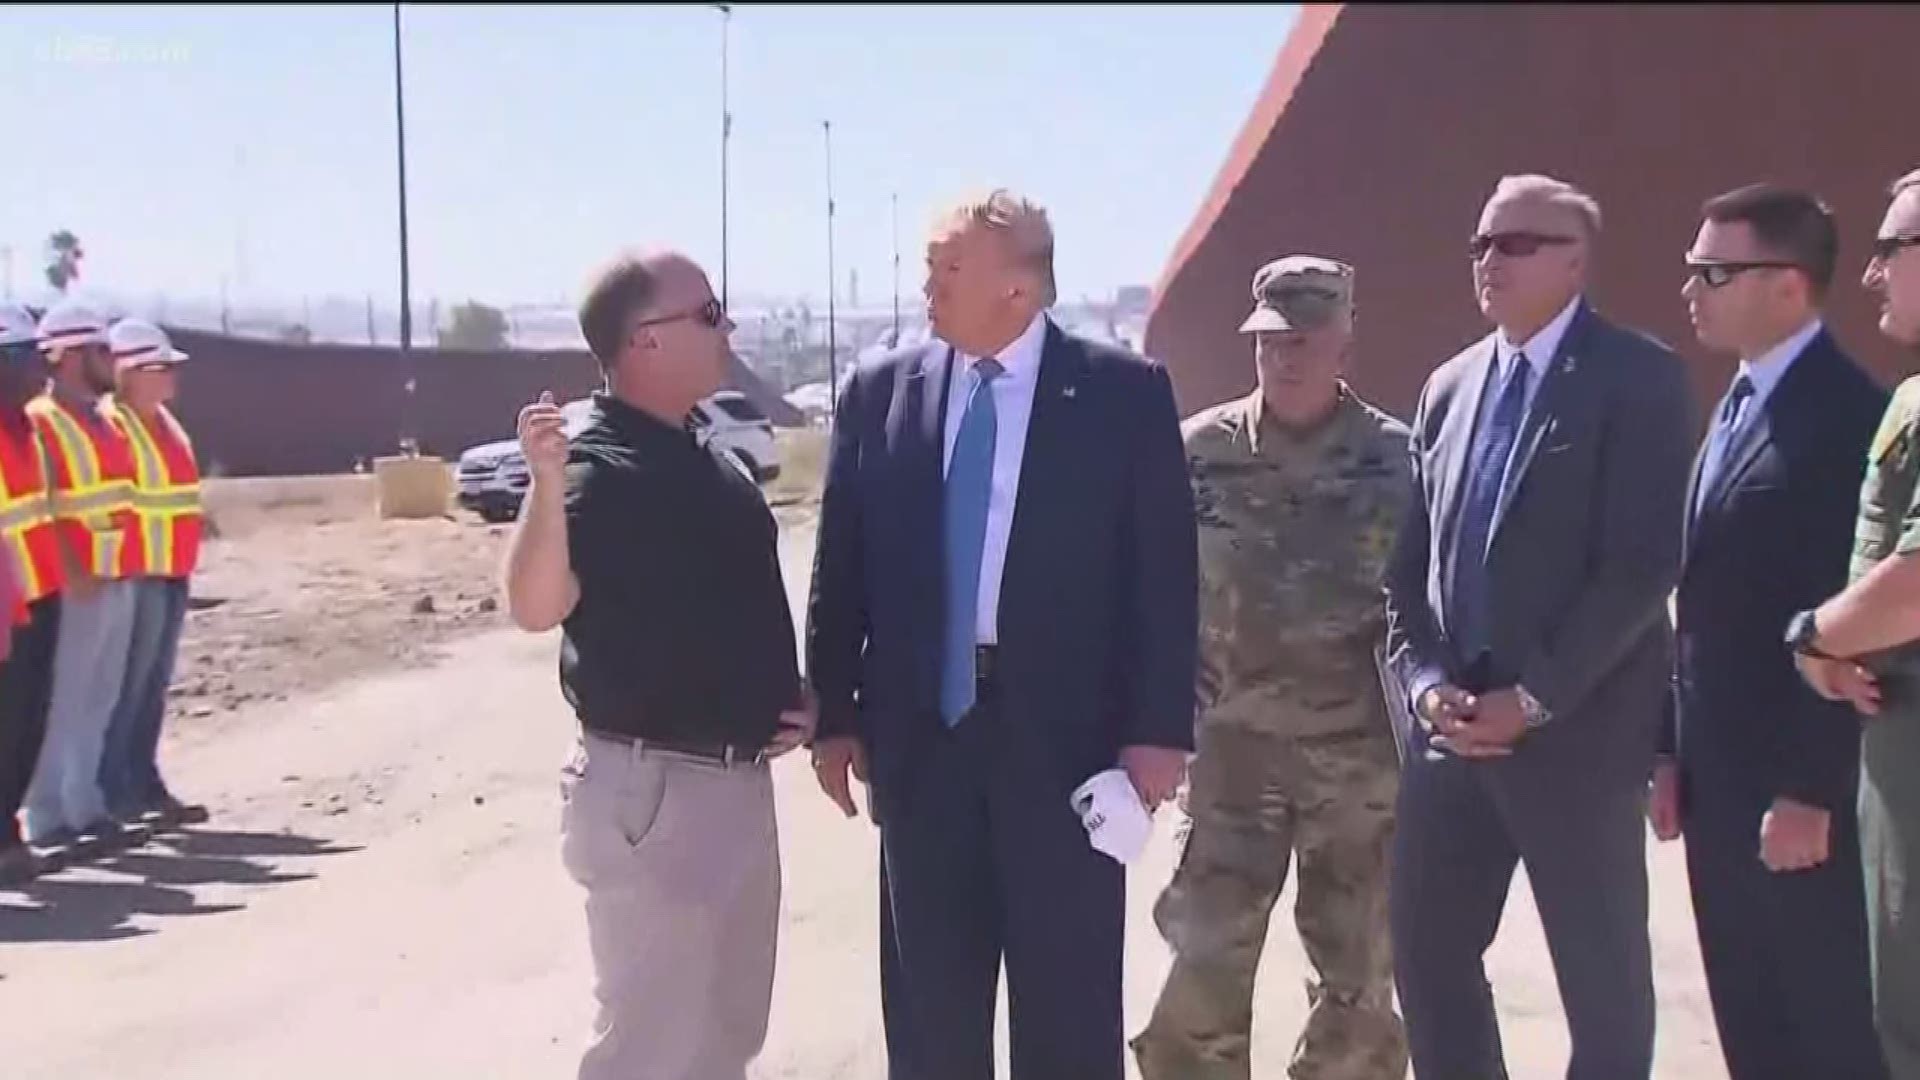 The visit was Trump's first to the border in California since April, when he visited a section of the barrier in Calexico.